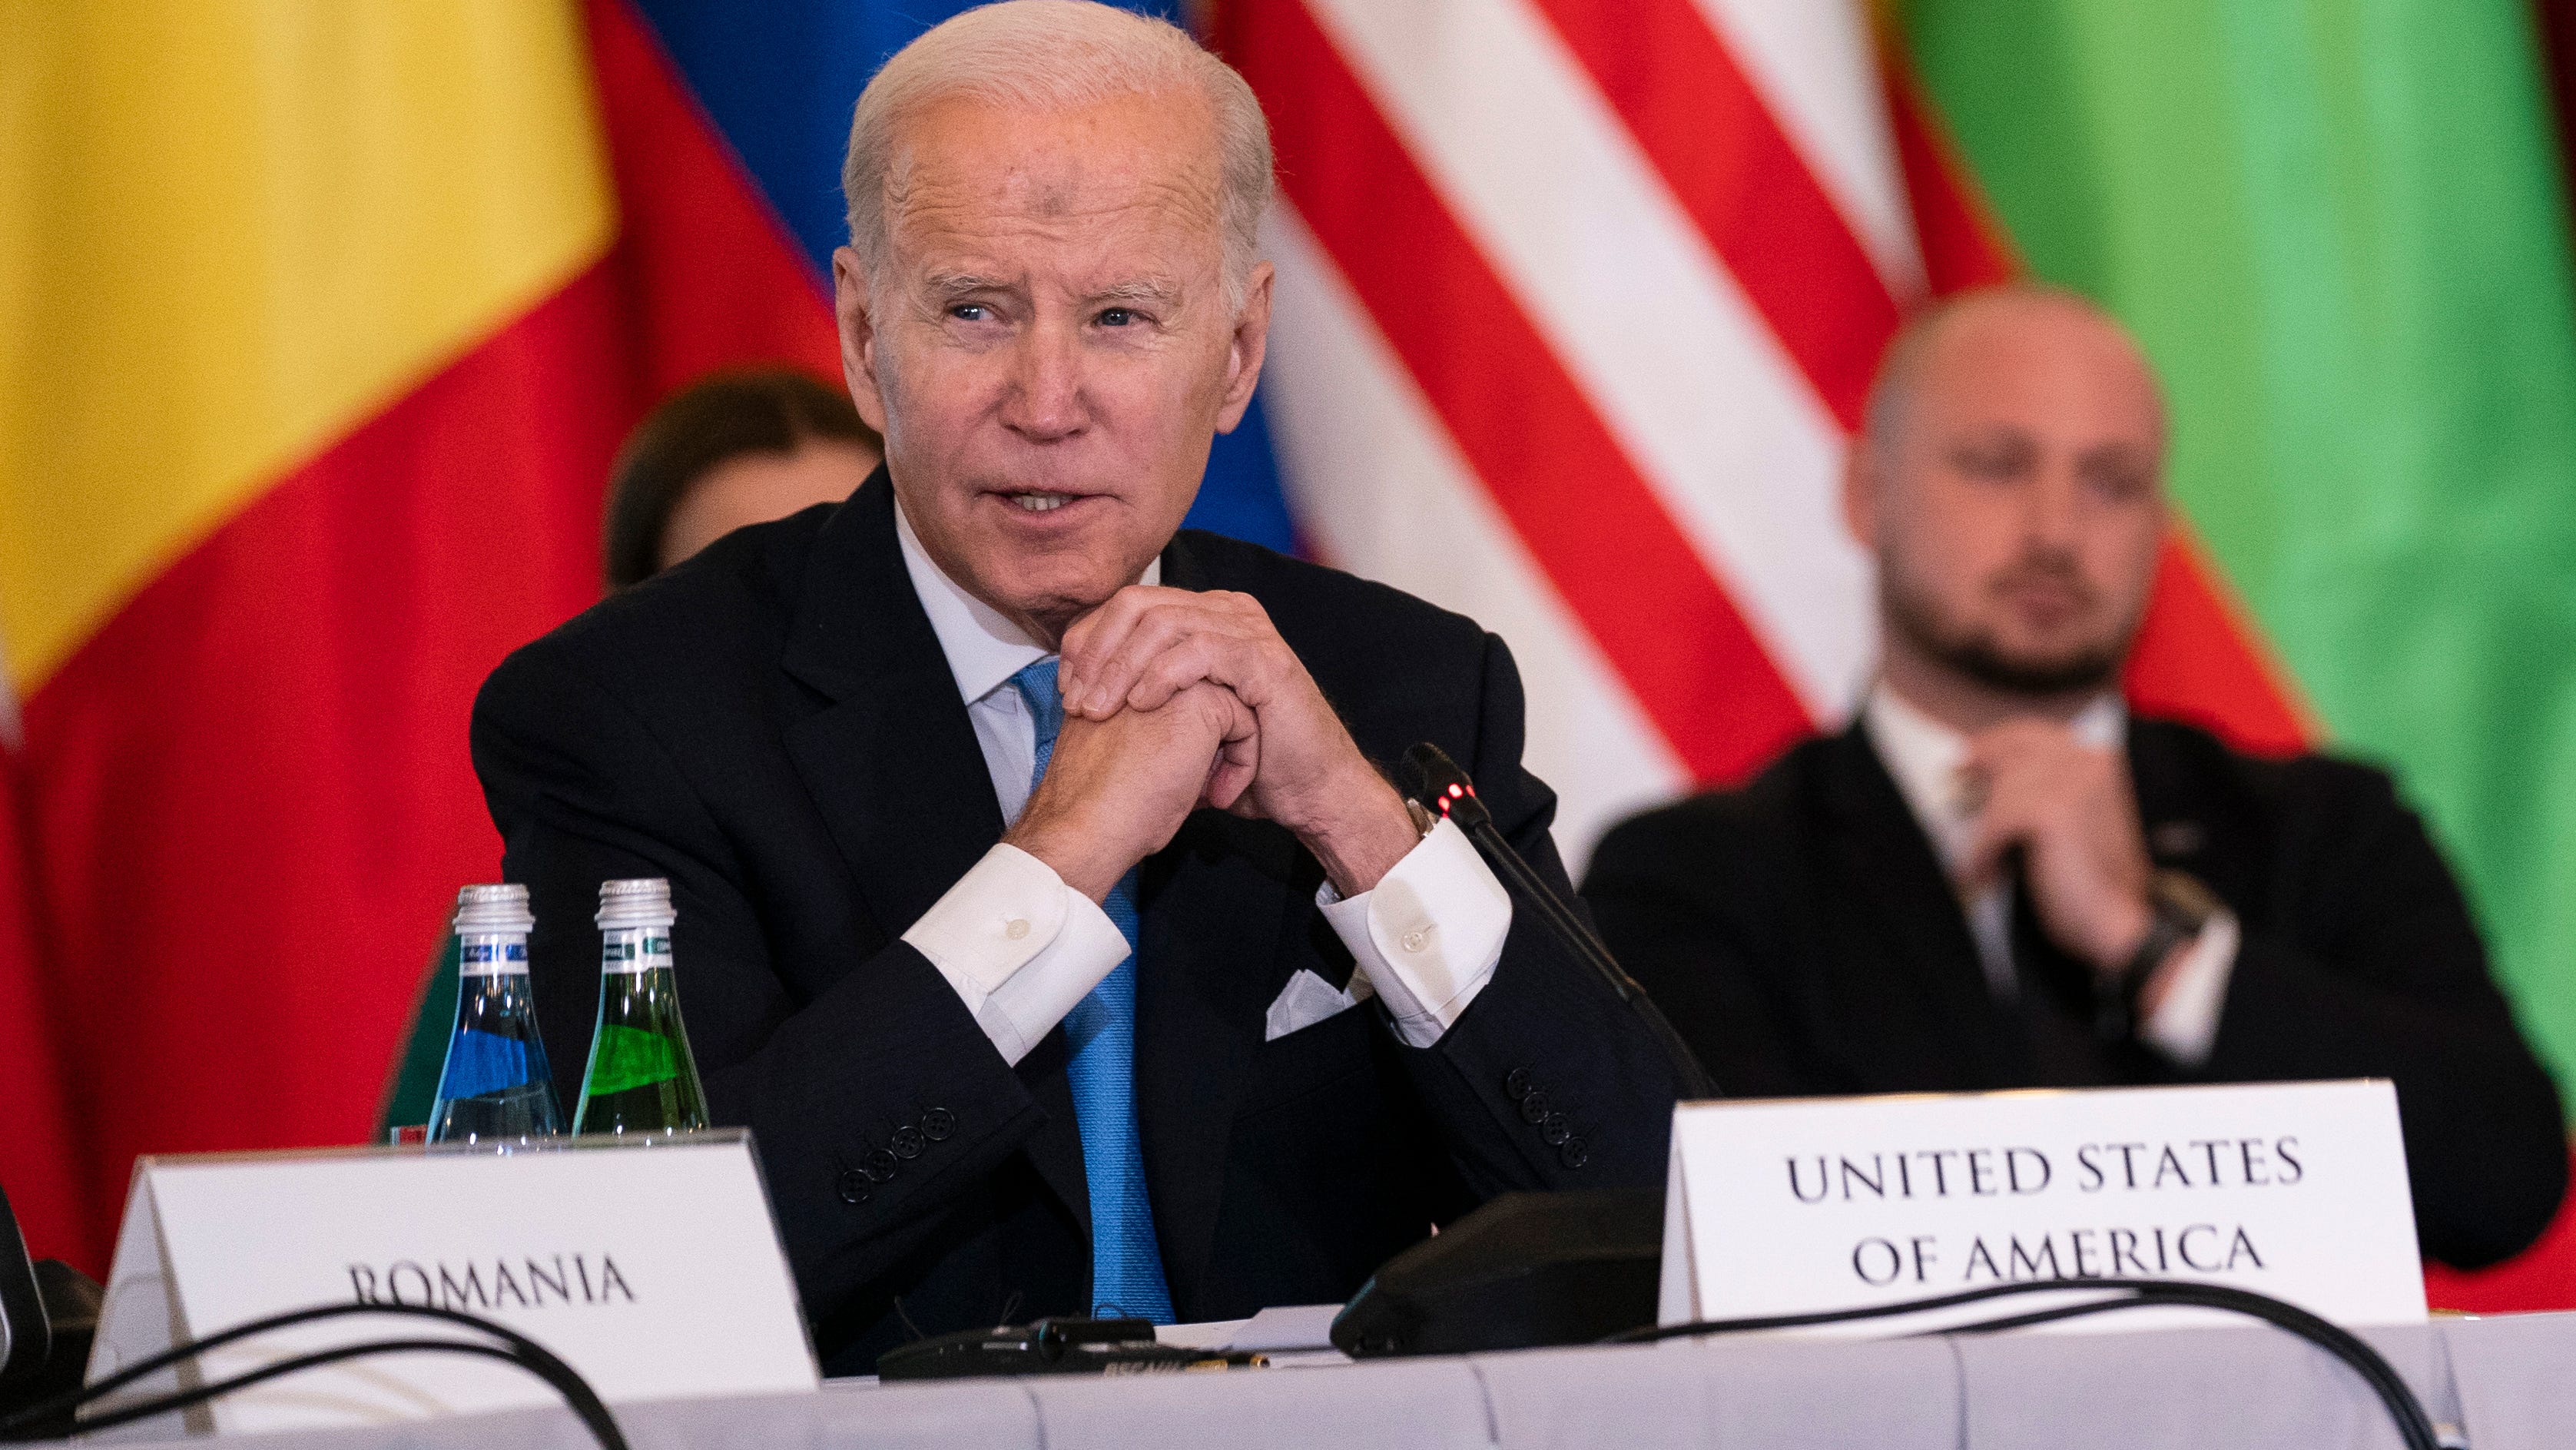 President Joe Biden speaks during a meeting with the leaders of the Bucharest Nine, a group of nine countries that make up the eastern flank of NATO, Wednesday, Feb. 22, 2023, in Warsaw. (AP Photo/ Evan Vucci) ORG XMIT: PLEV112